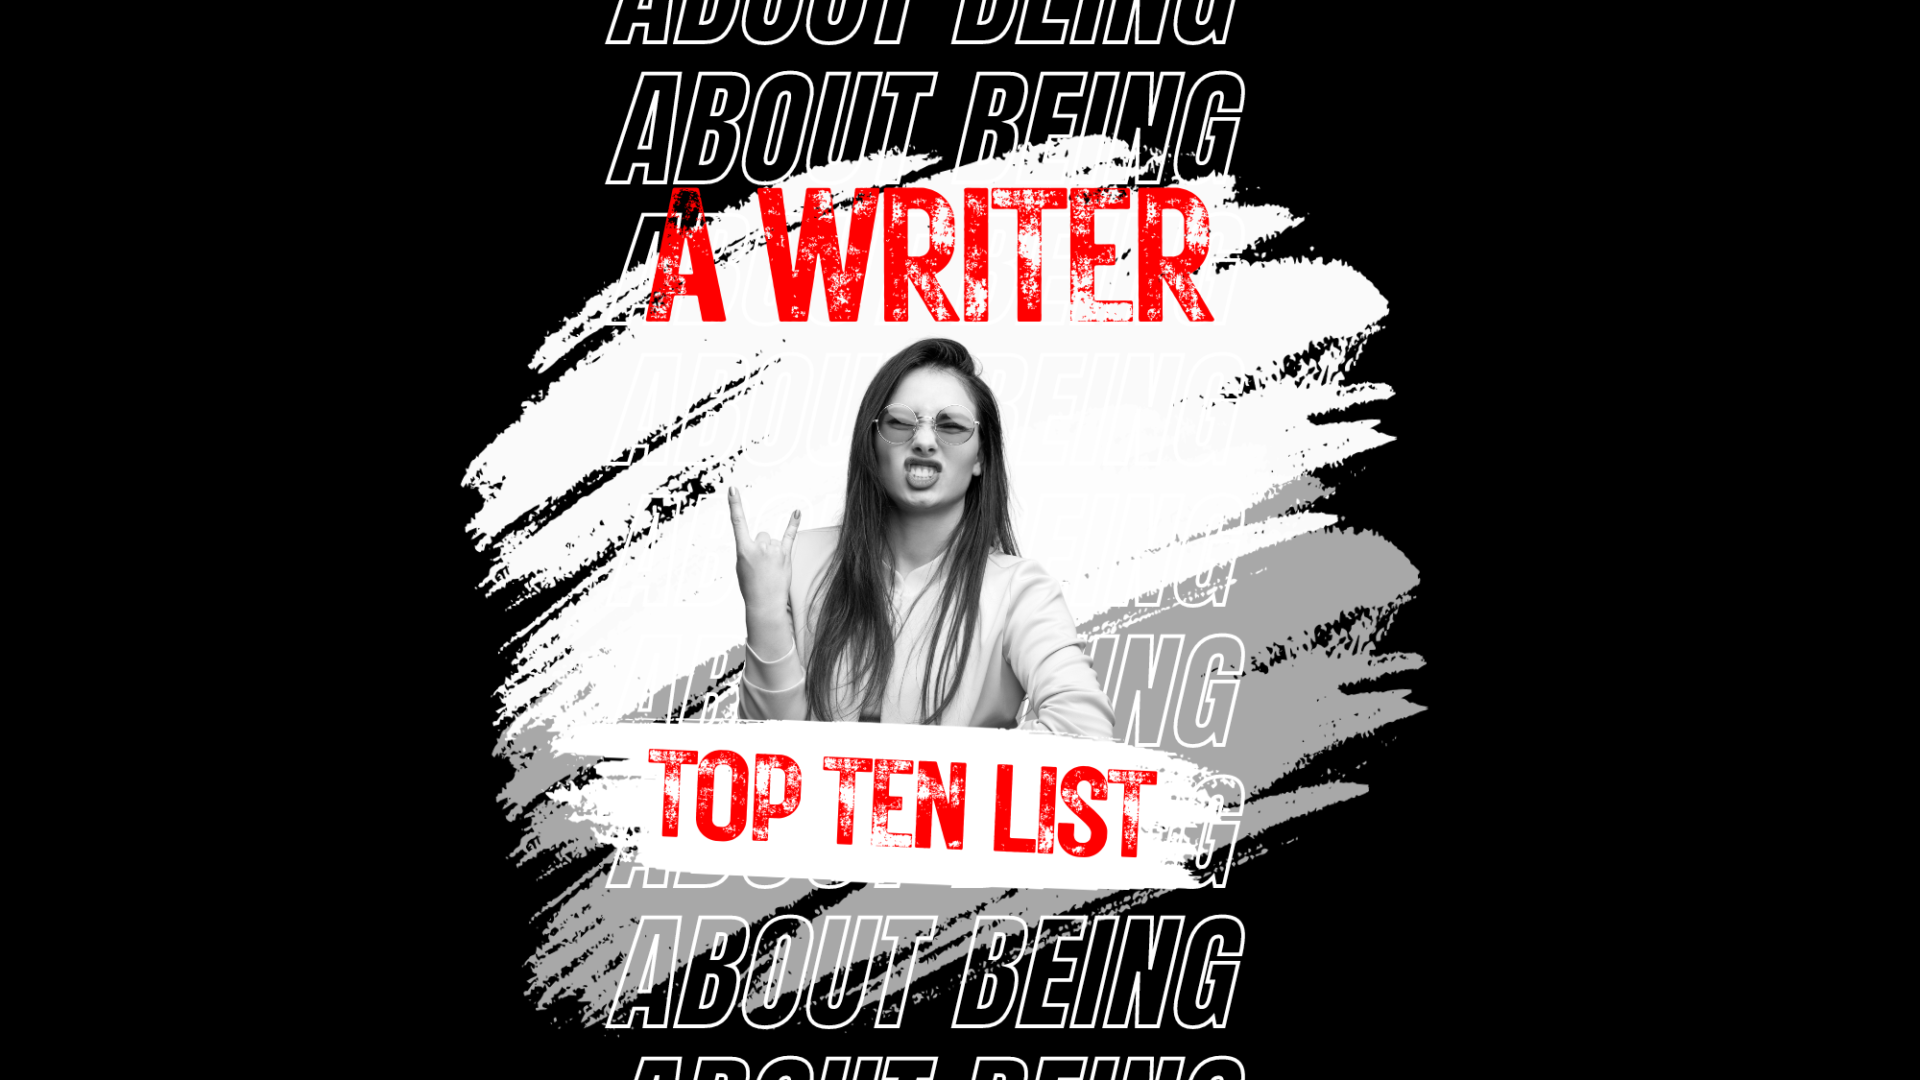 Top 10 Lists - About Being a Writer